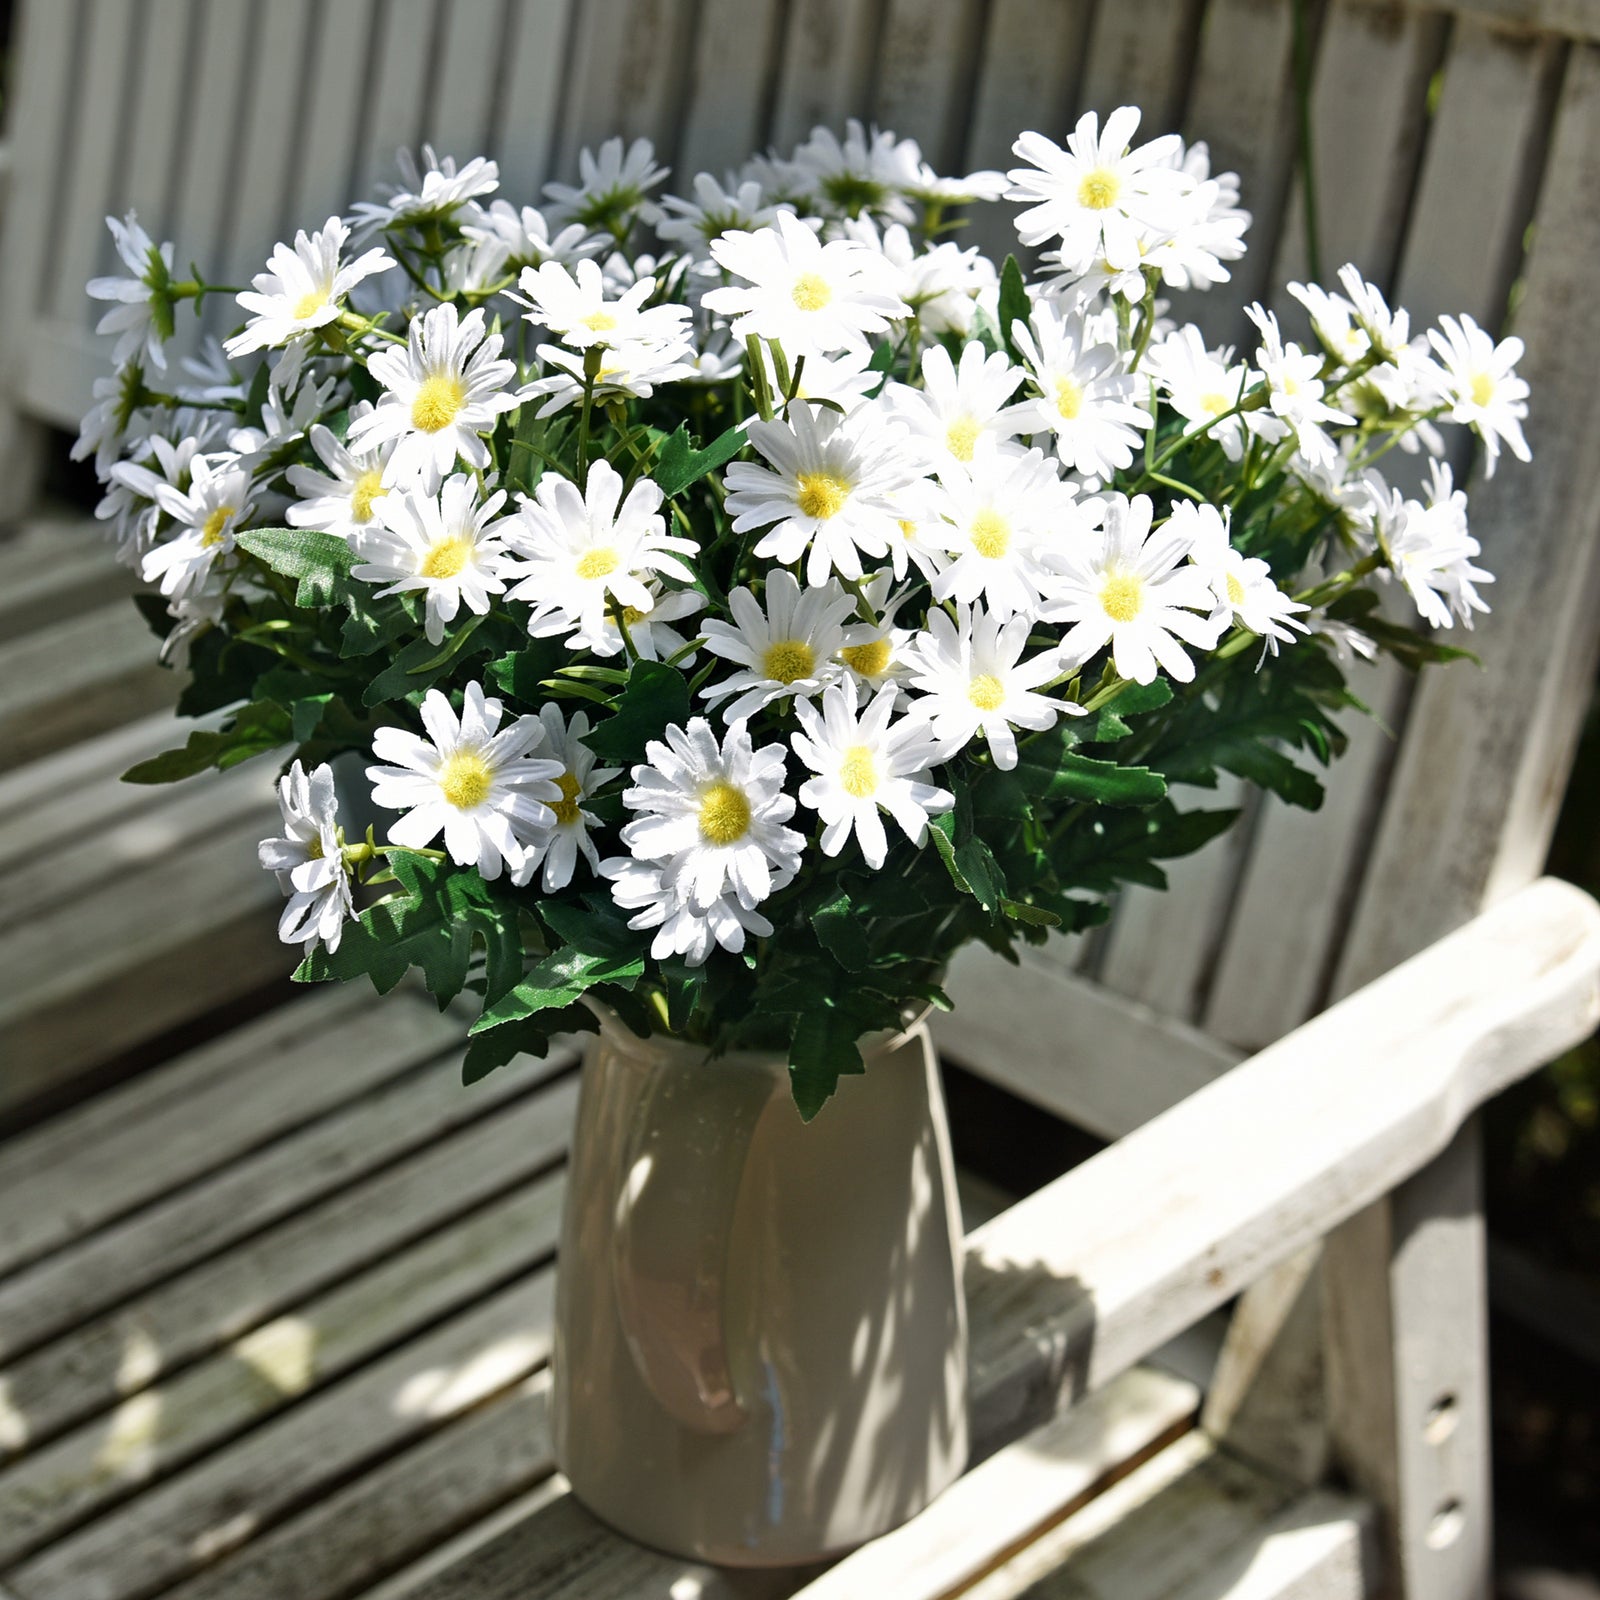 Daisy Silk Flowers Outdoor Artificial Flowers Arrangements (Simply White) 2 Bunches